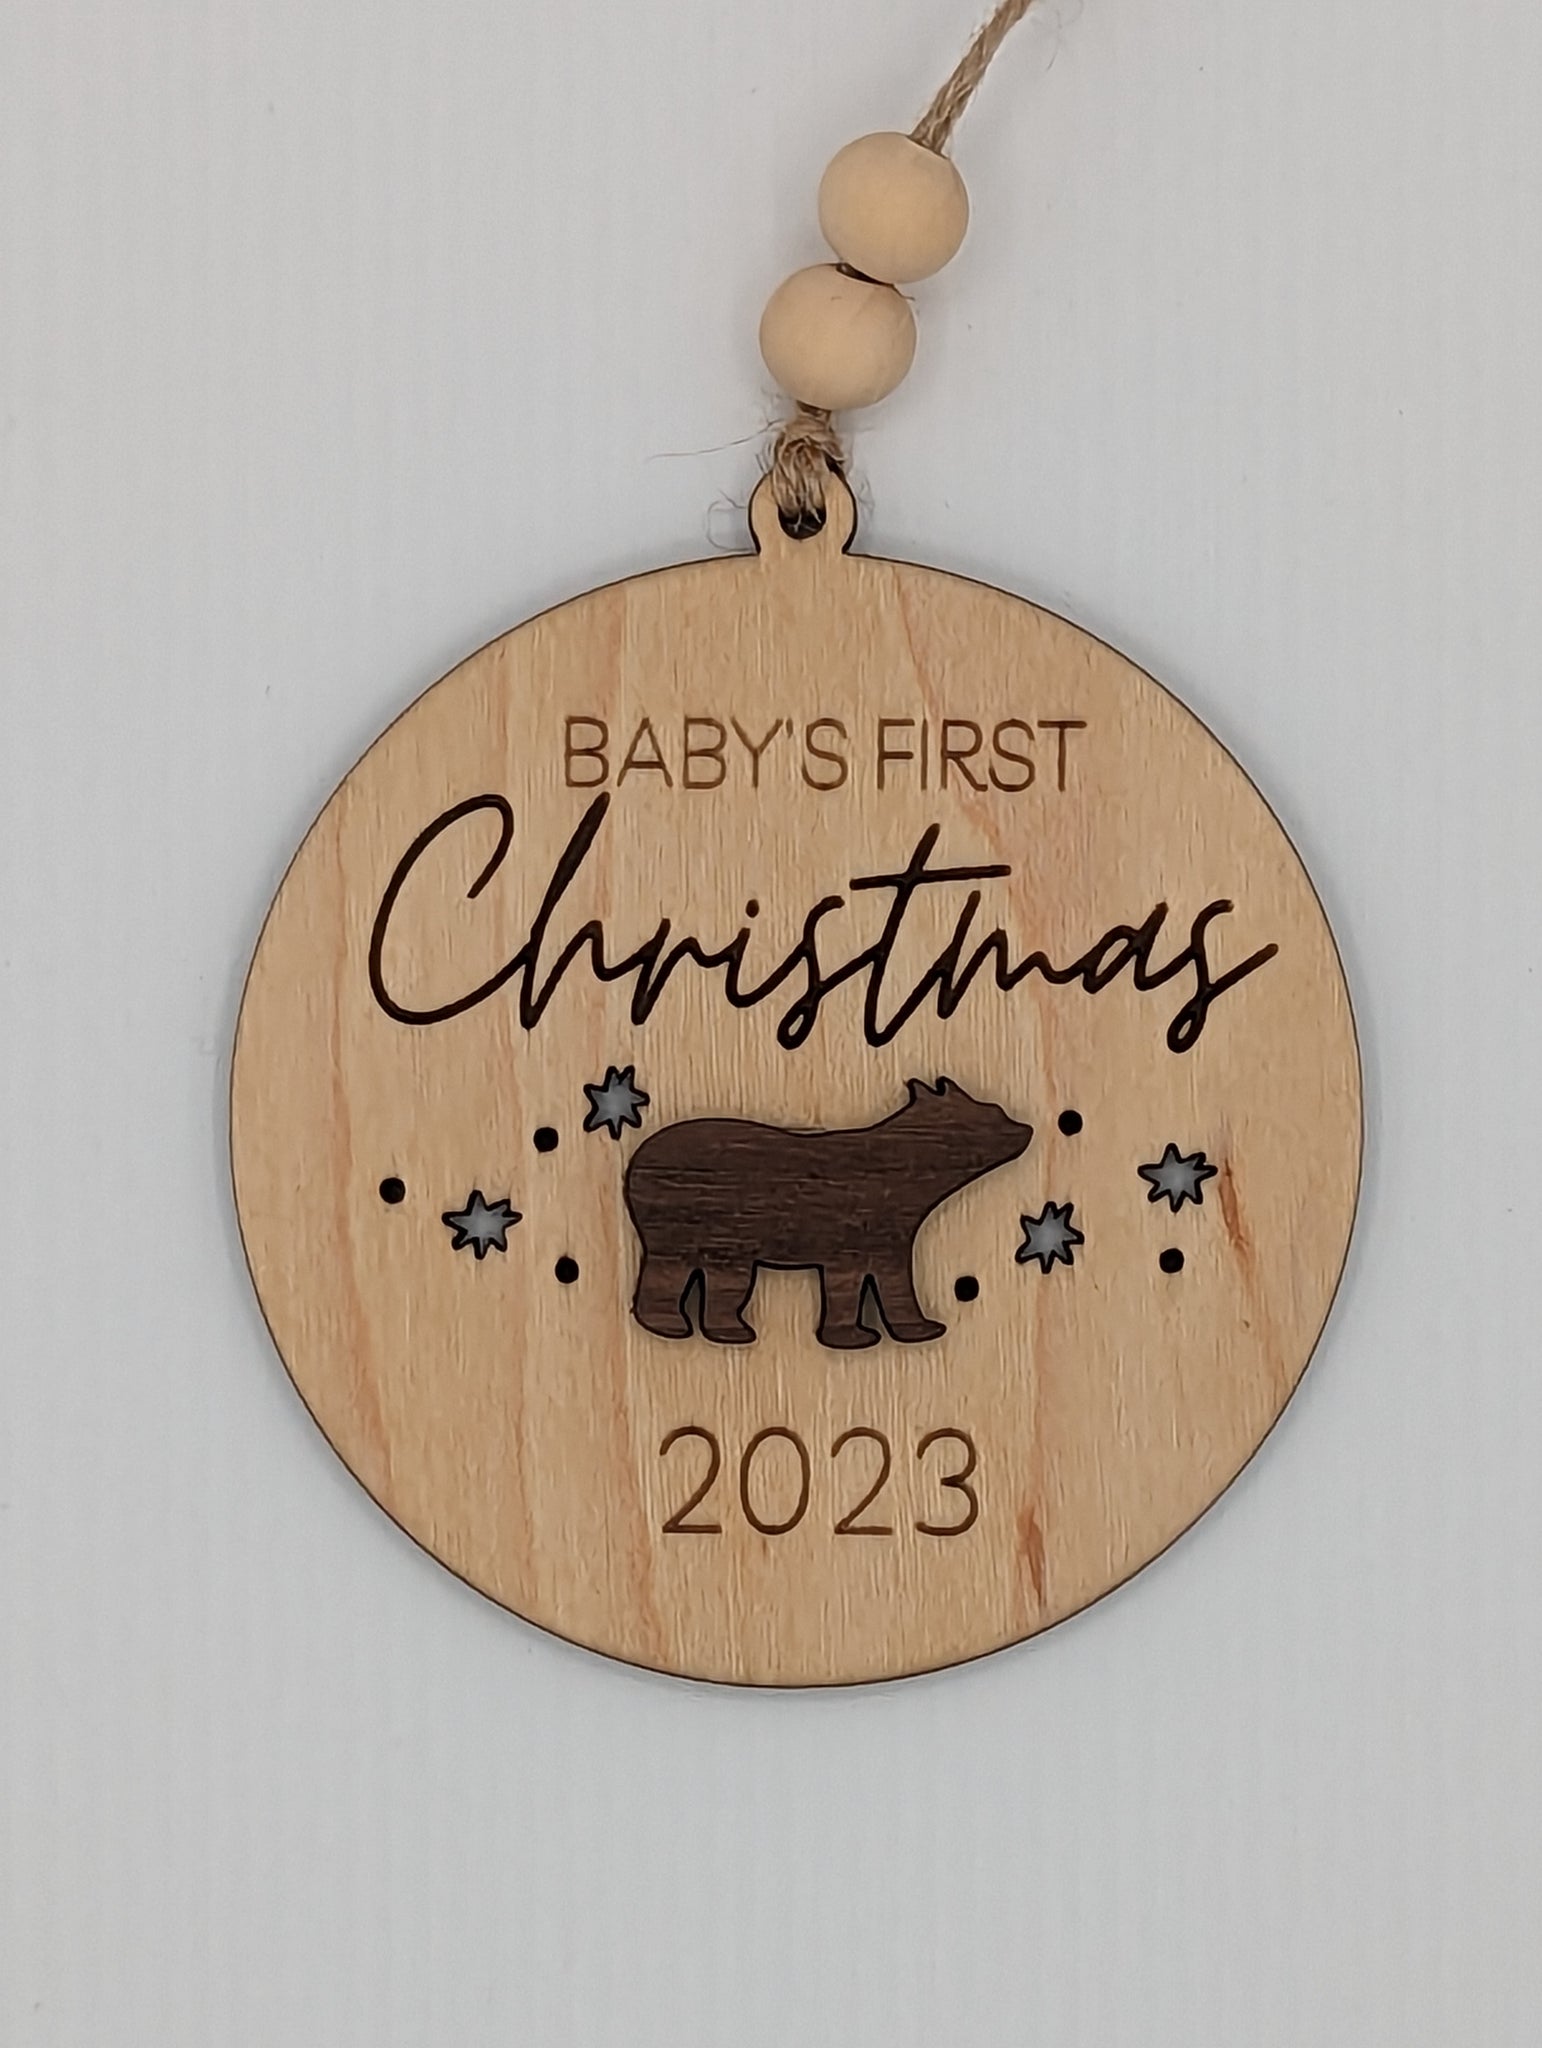 My First Christmas - Personalized Christmas Ornament